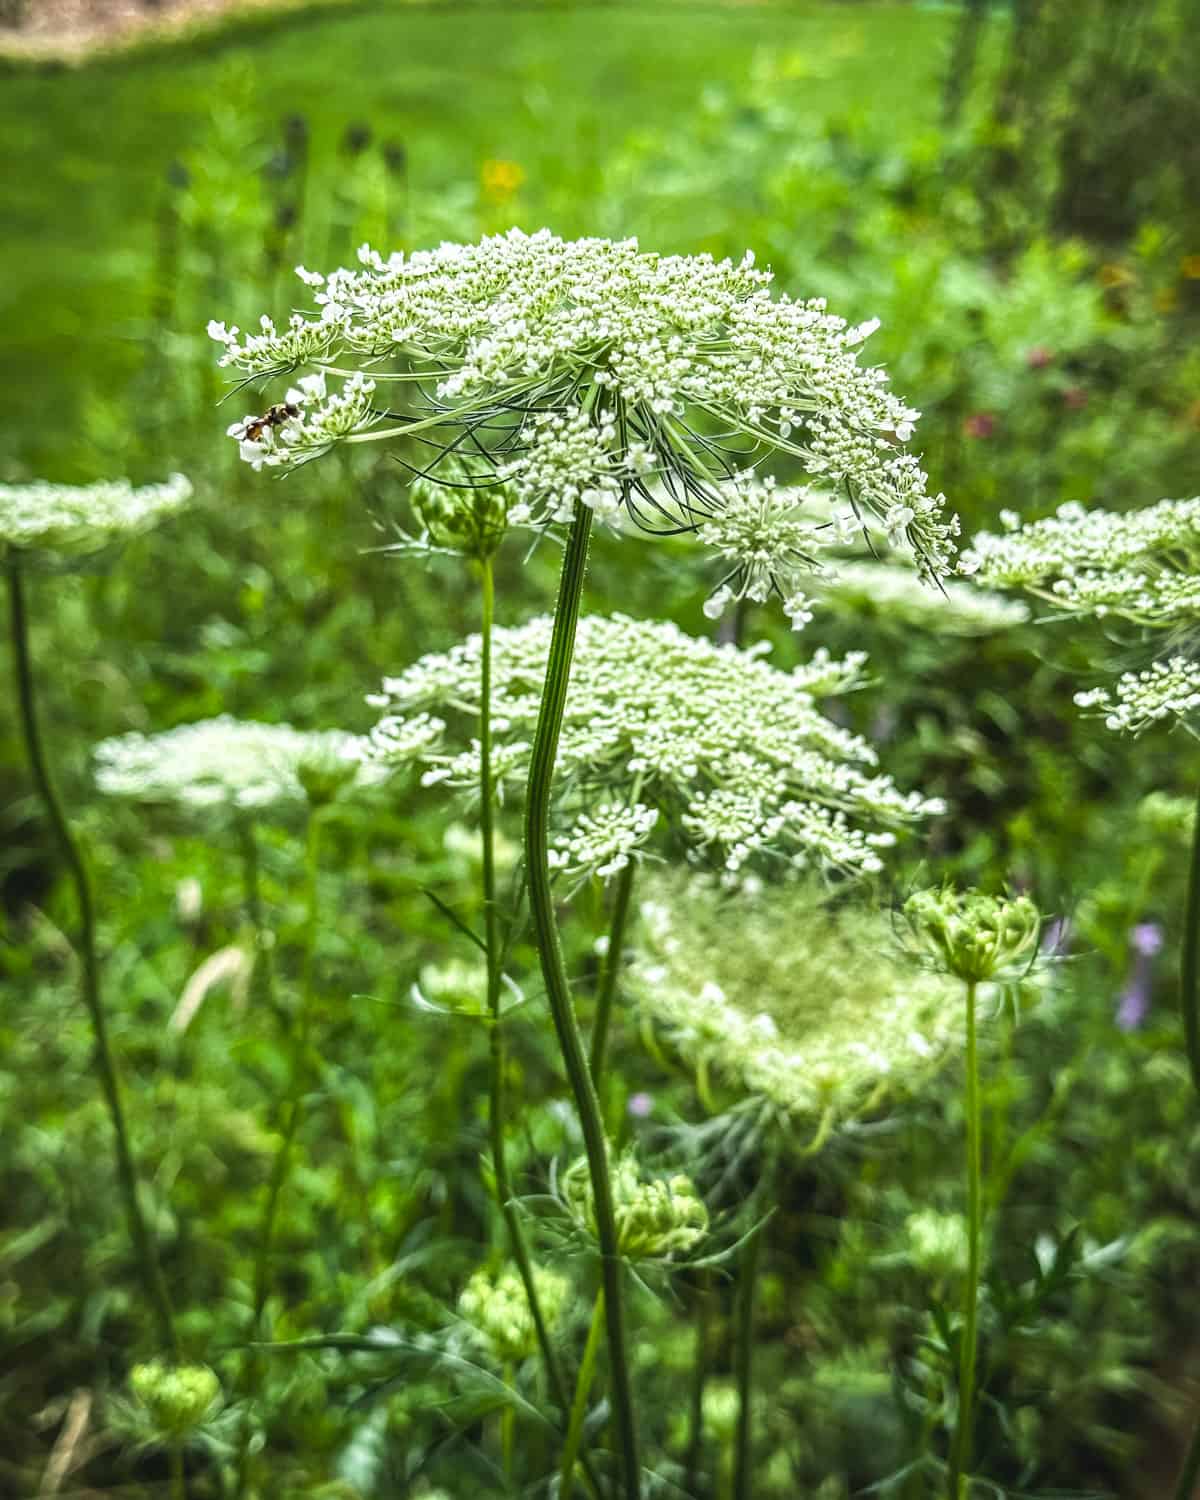 Queen Anne's lace flowers growing, side view.